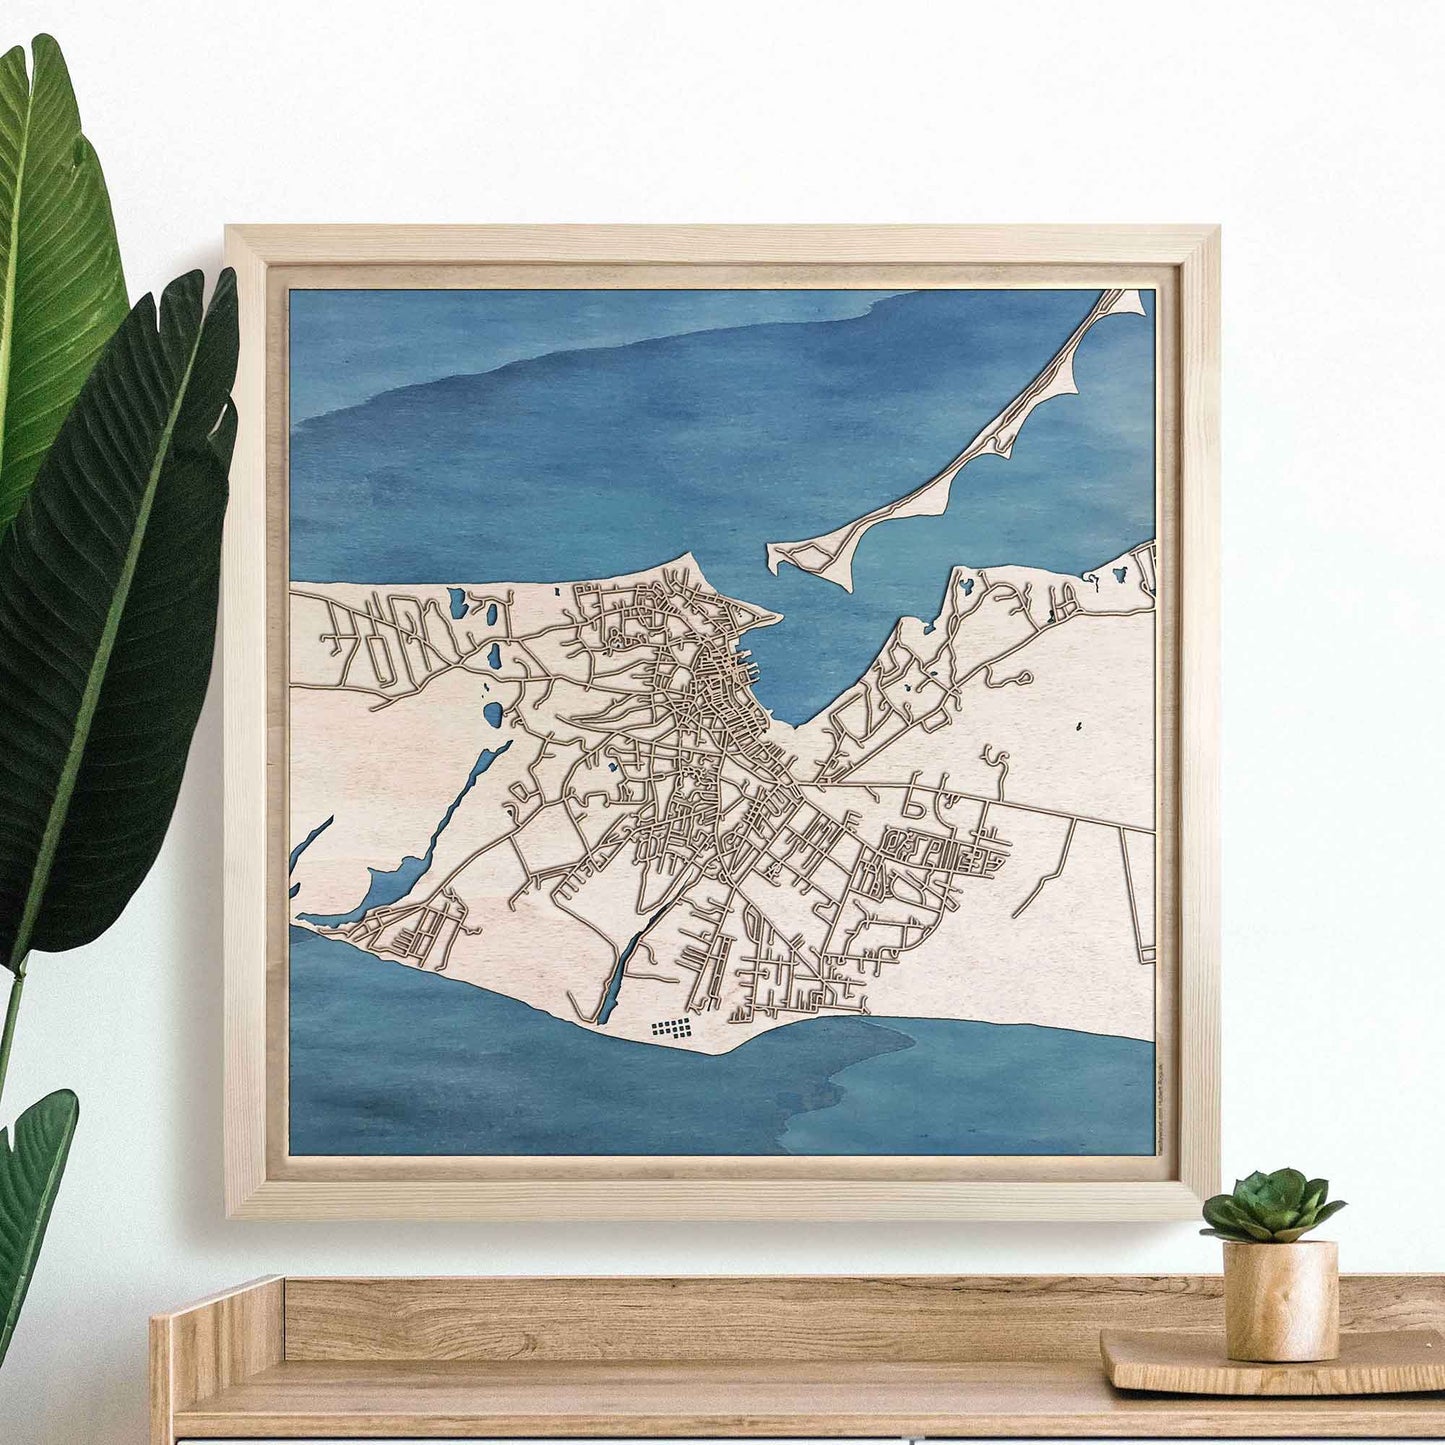 Nantucket Wooden Map by CityWood - Custom Wood Map Art - Unique Laser Cut Engraved - Anniversary Gift